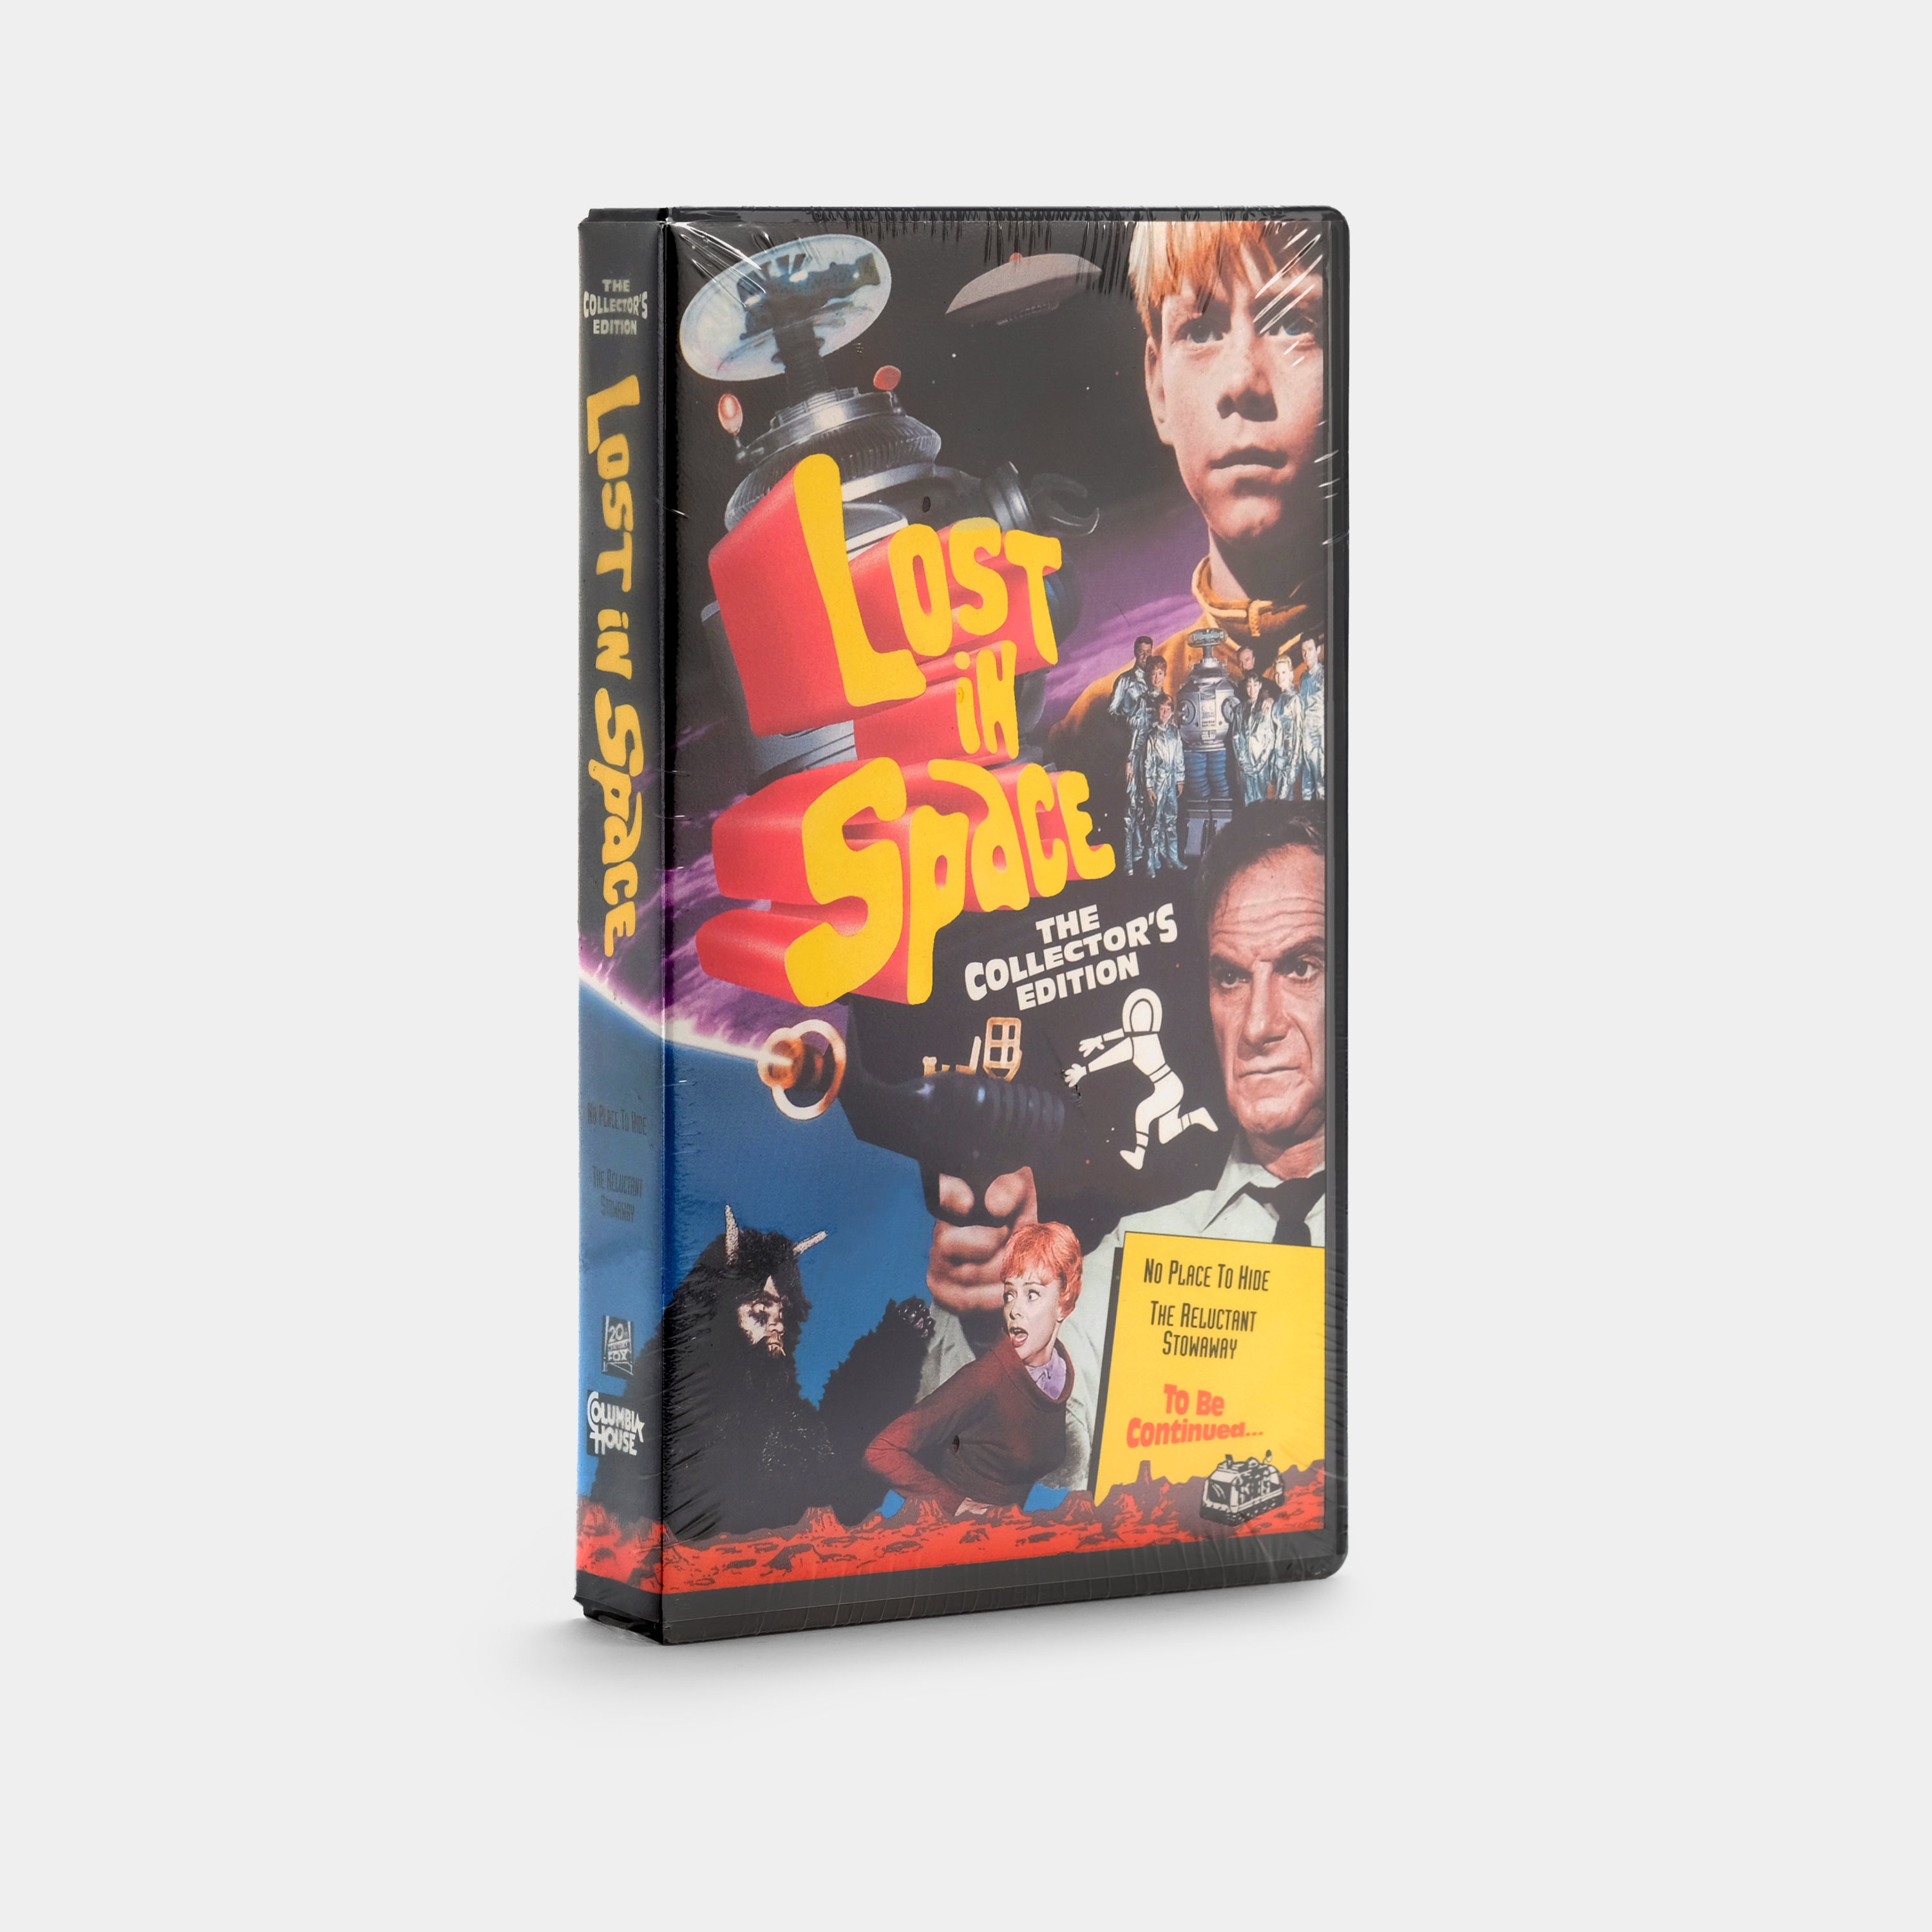 Lost in Space (Sealed) VHS Tape